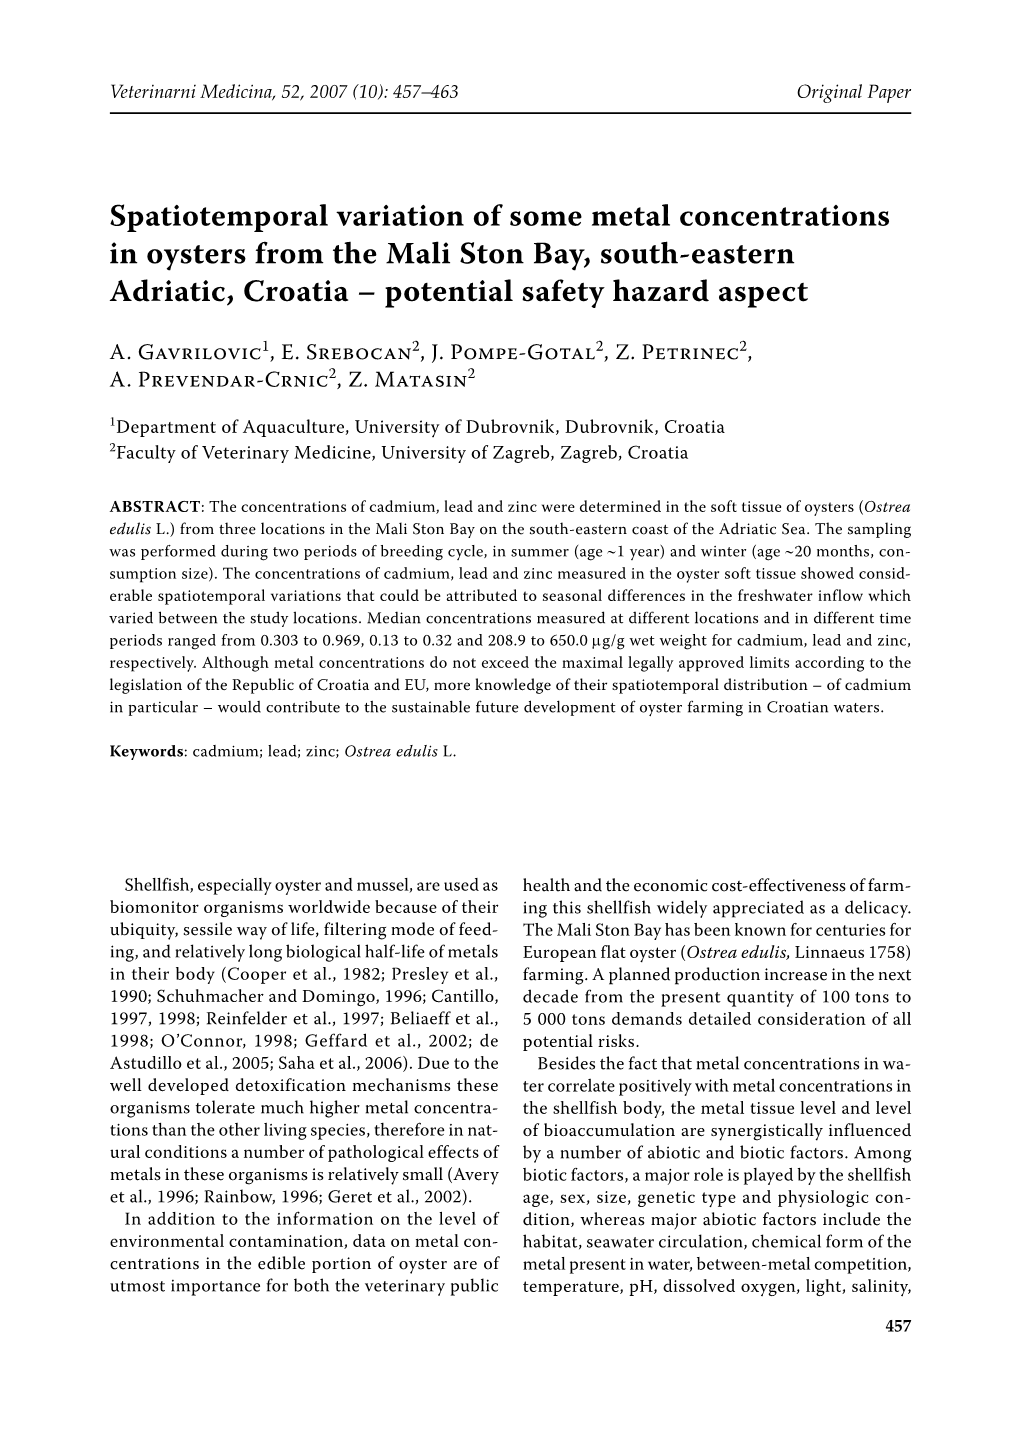 Spatiotemporal Variation of Some Metal Concentrations in Oysters from the Mali Ston Bay, South-Eastern Adriatic, Croatia – Potential Safety Hazard Aspect